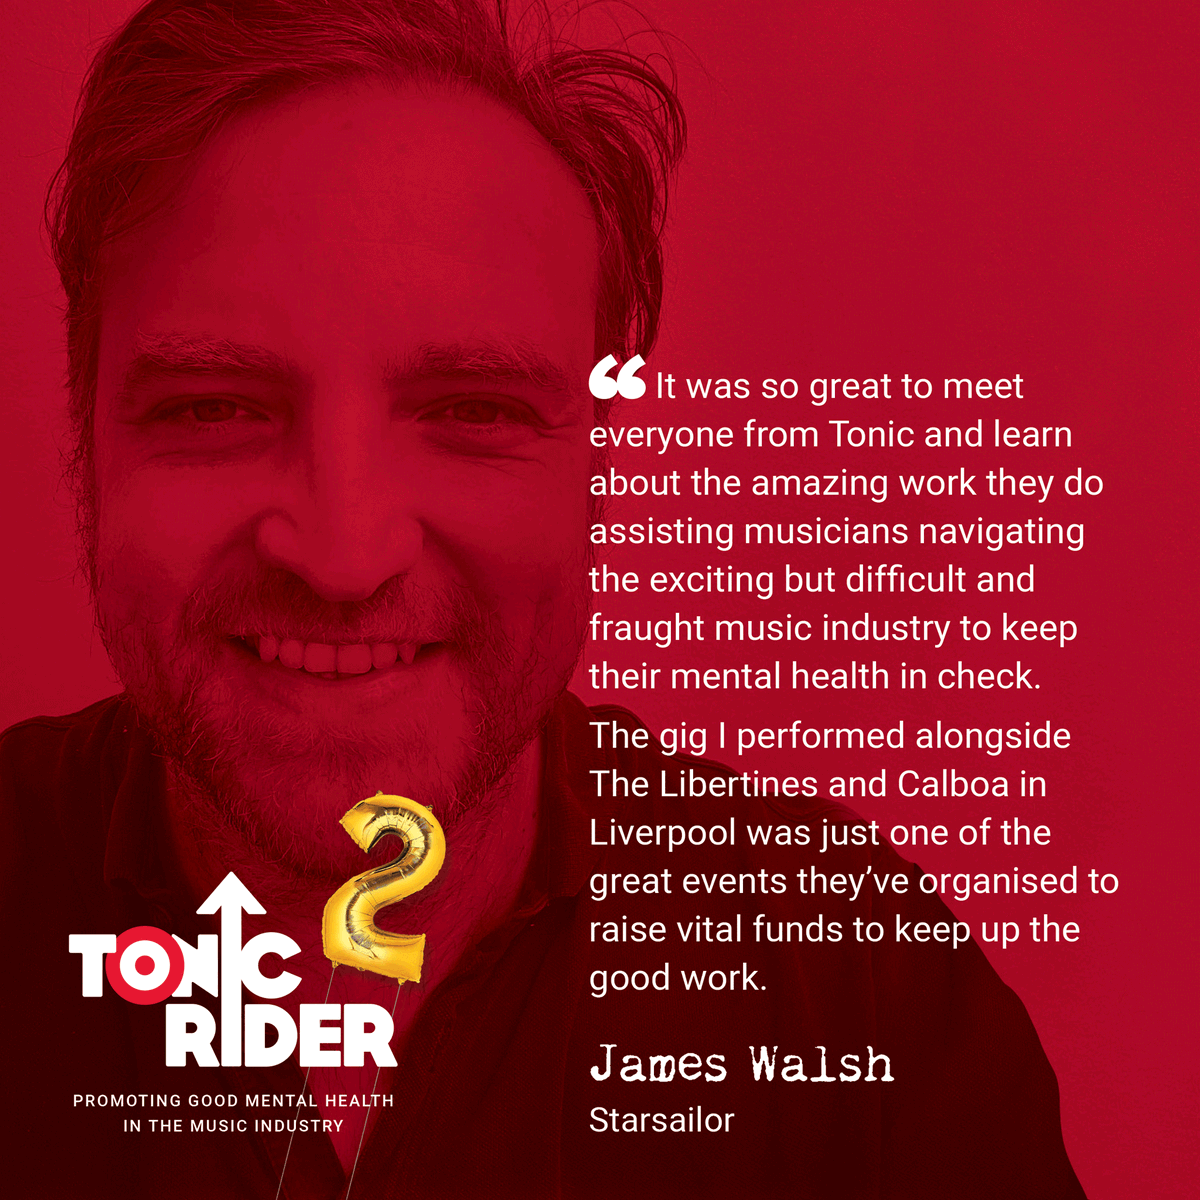 Tonic Rider turns 2 today!
James Walsh (Starsailor), explains what Tonic means to him.
#TonicRider #Tonic #MentalHealth #Wellbeing 
#MusicIndustry #Music